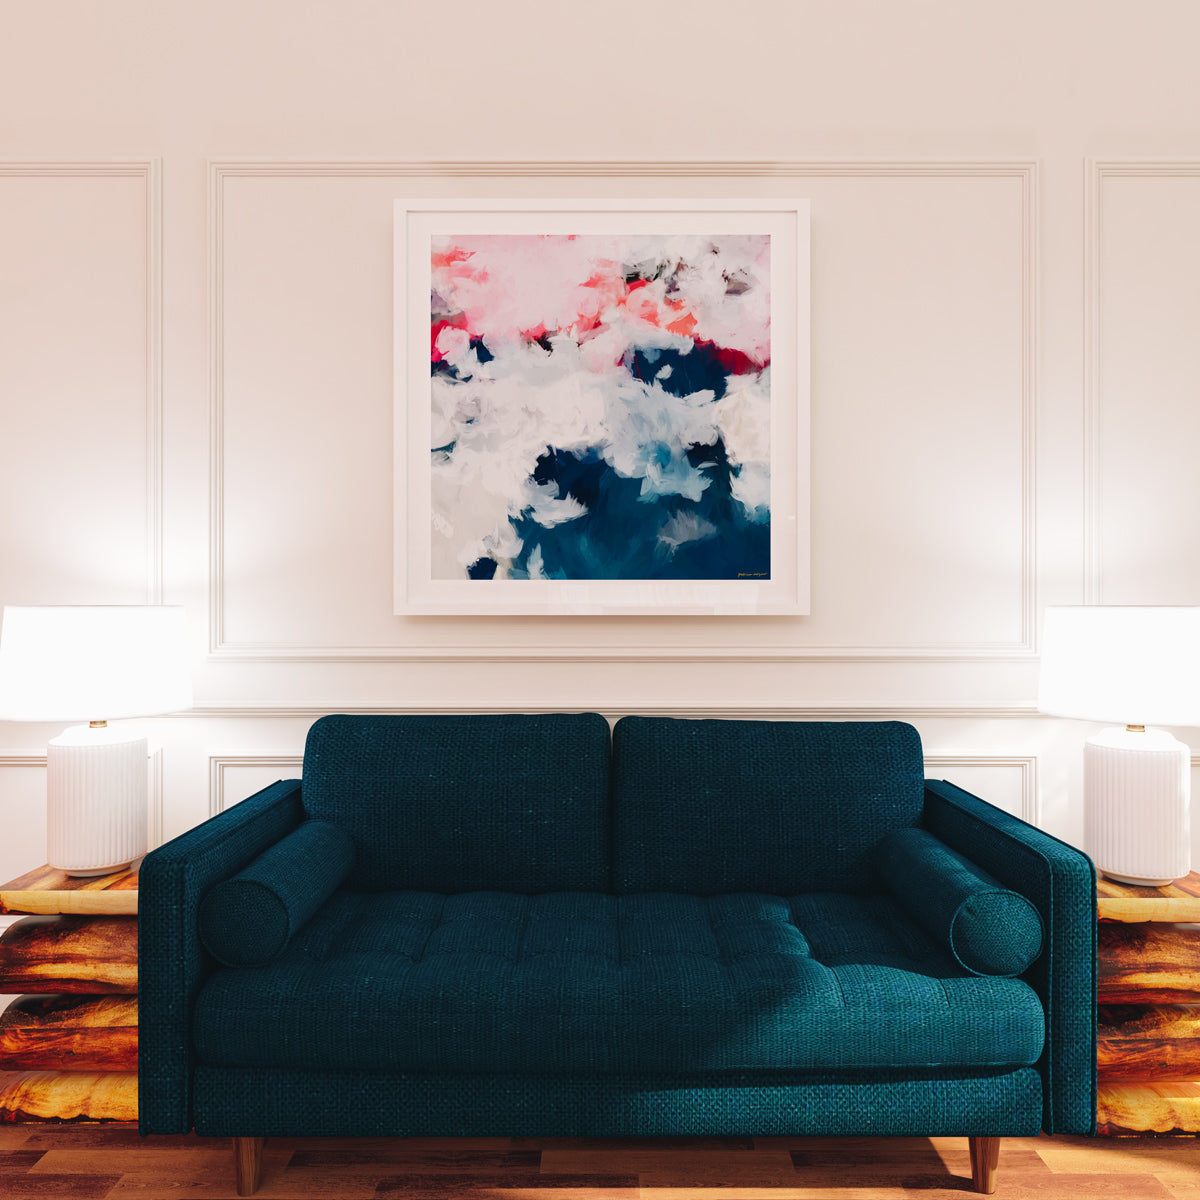 Oceane, blue and pink colorful abstract wall art print by Parima Studio. Oversize art for over sofa in living room.